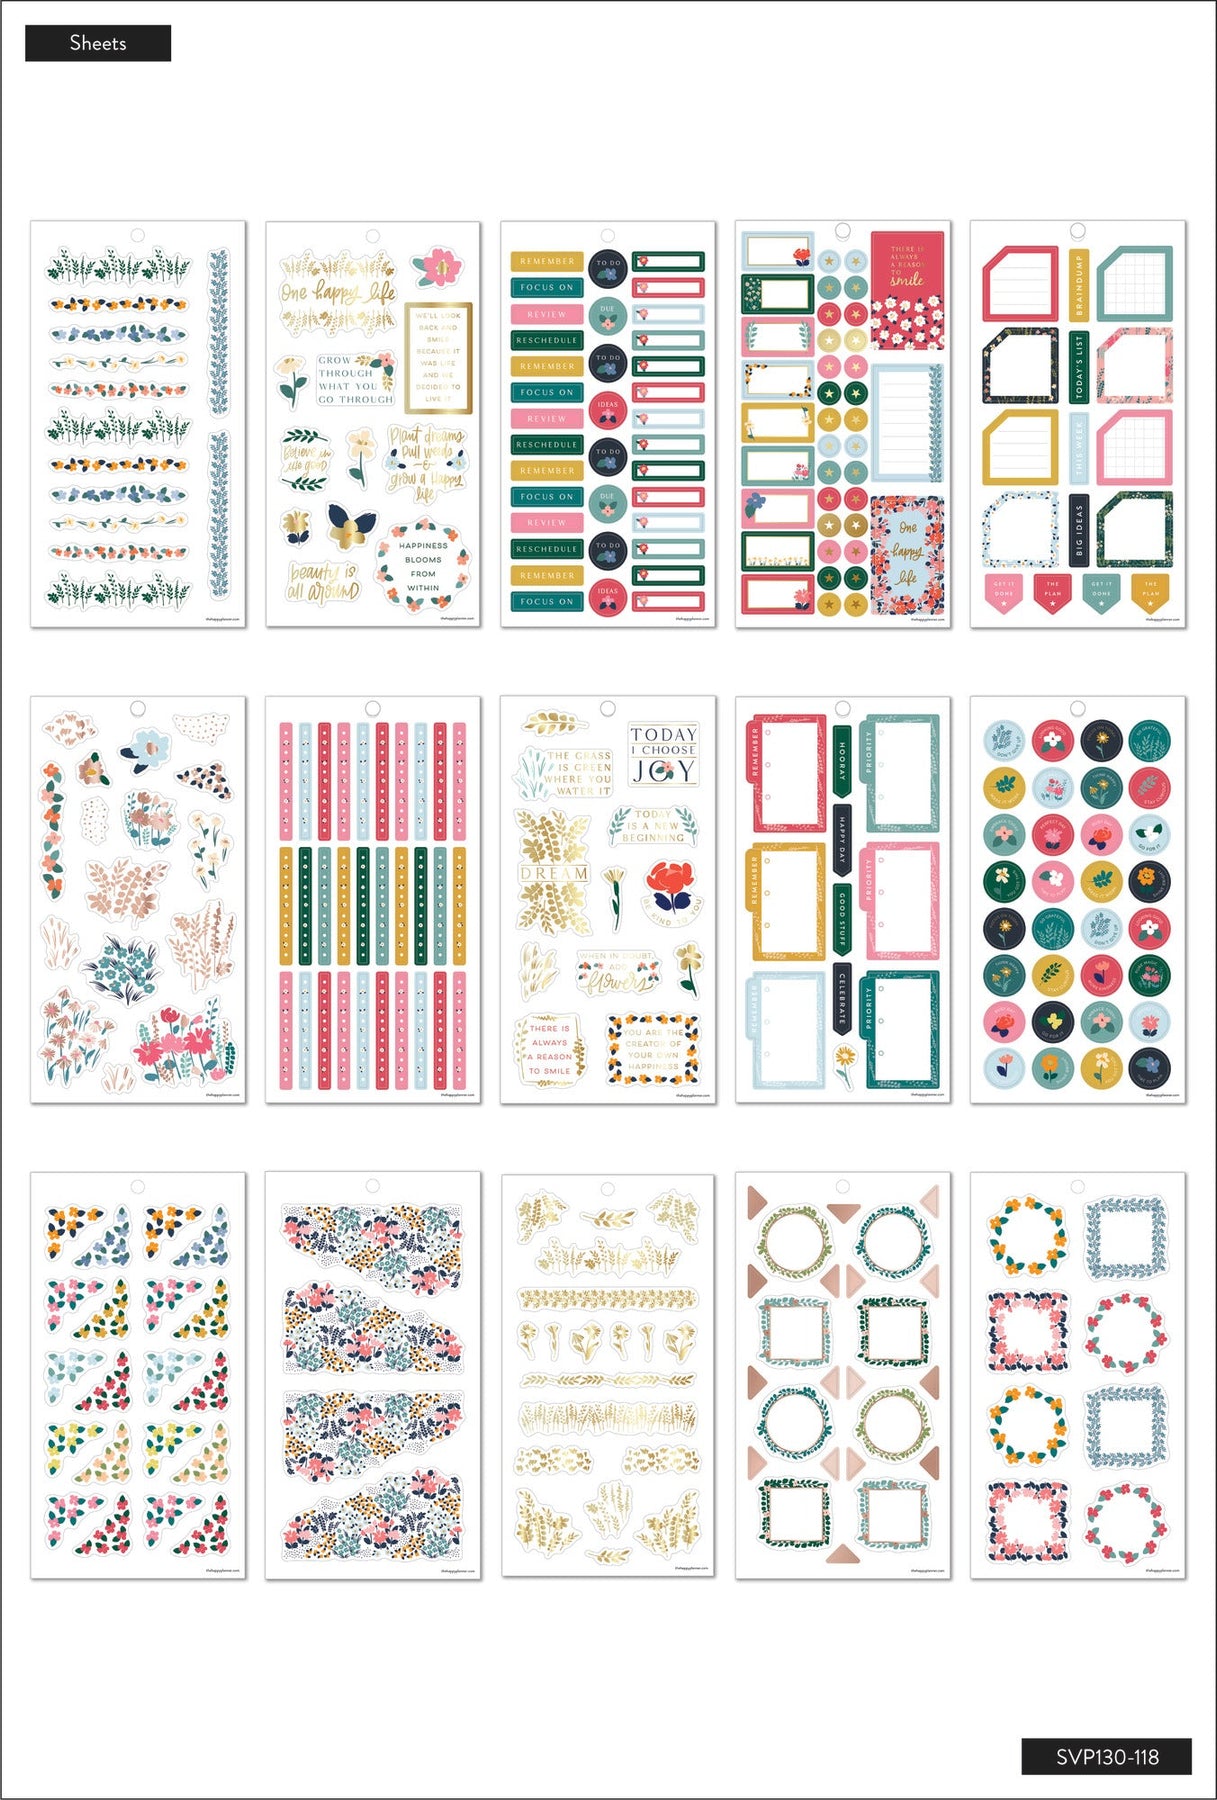 Girly Happy Planner Washi Sticker Book 393 Pieces Rose Gold